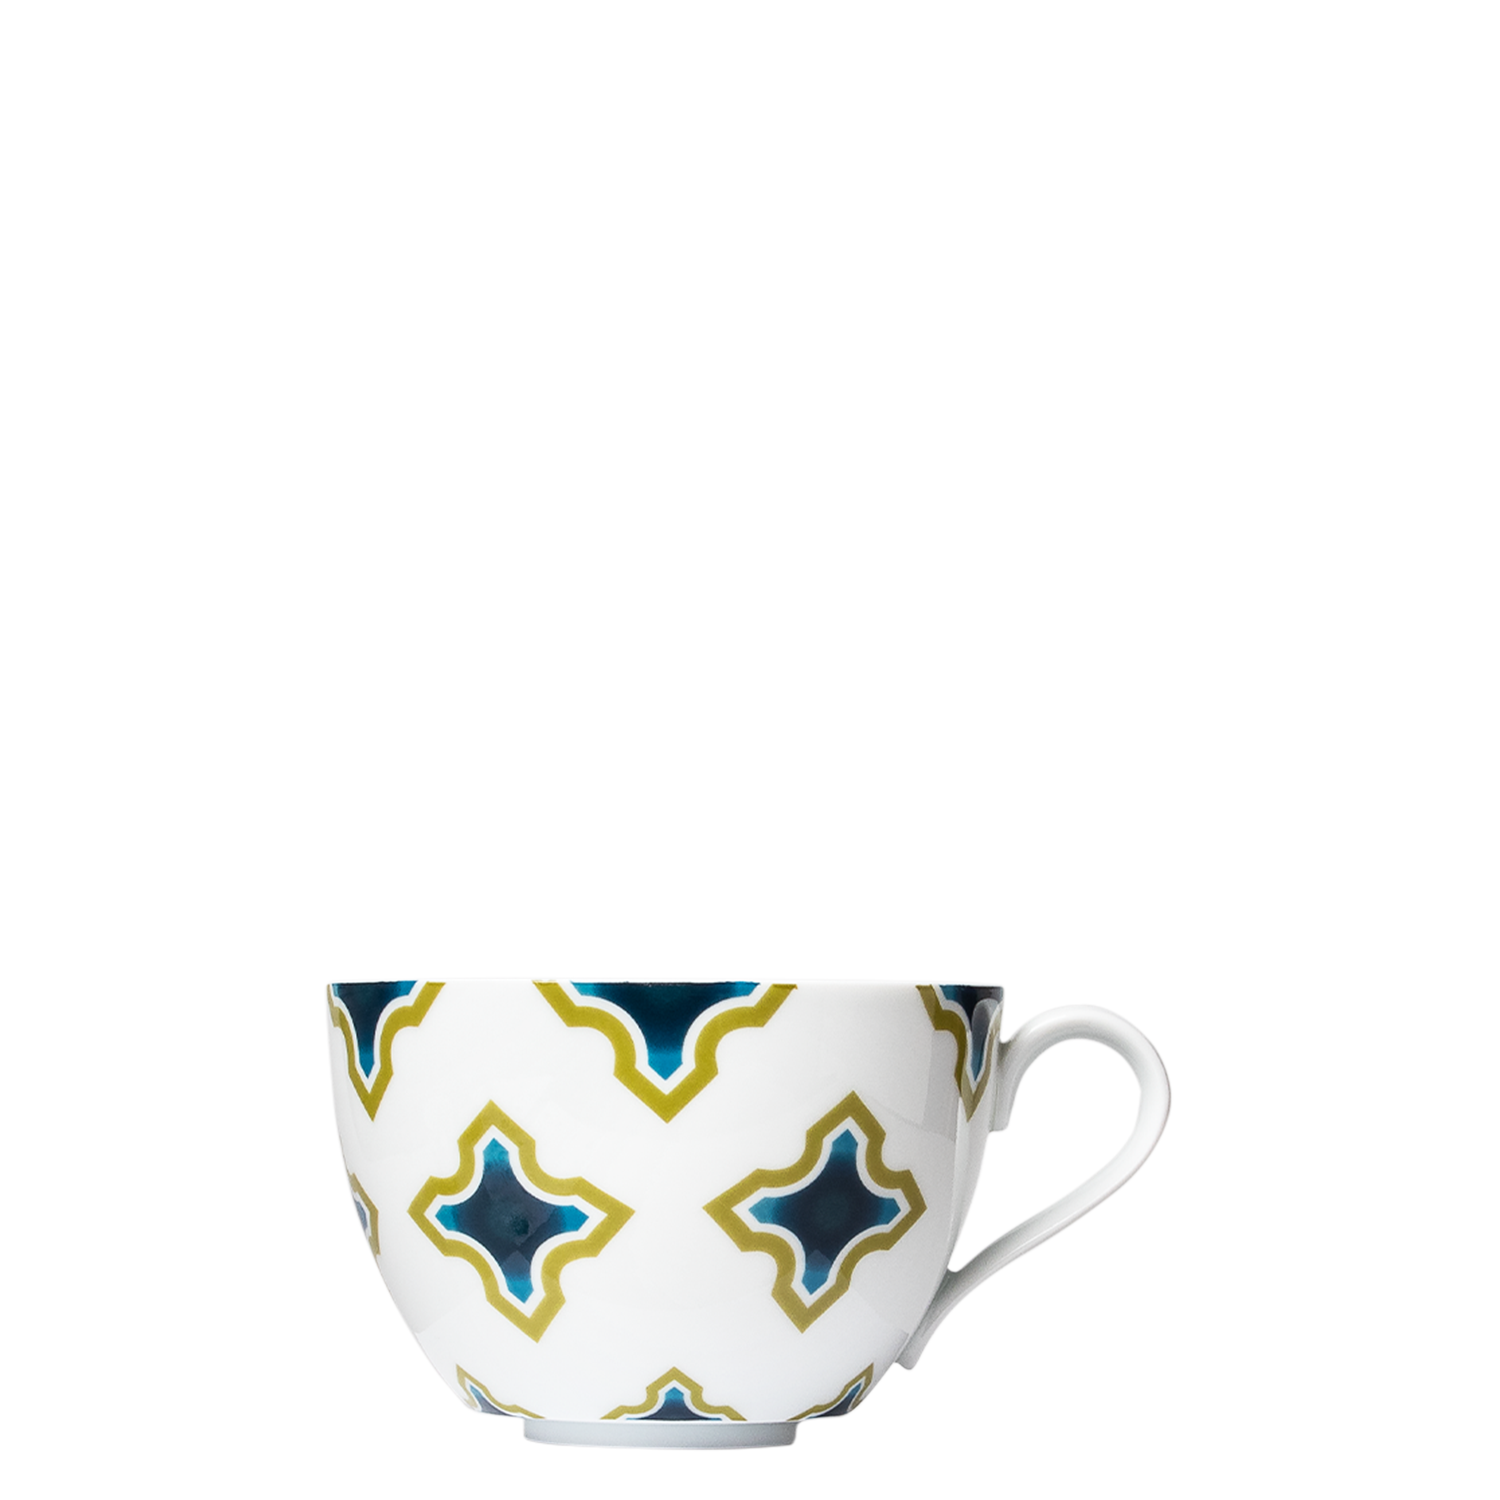 Cappuccino Cup Sieger by Furstenberg Collezione My China! Paraiso